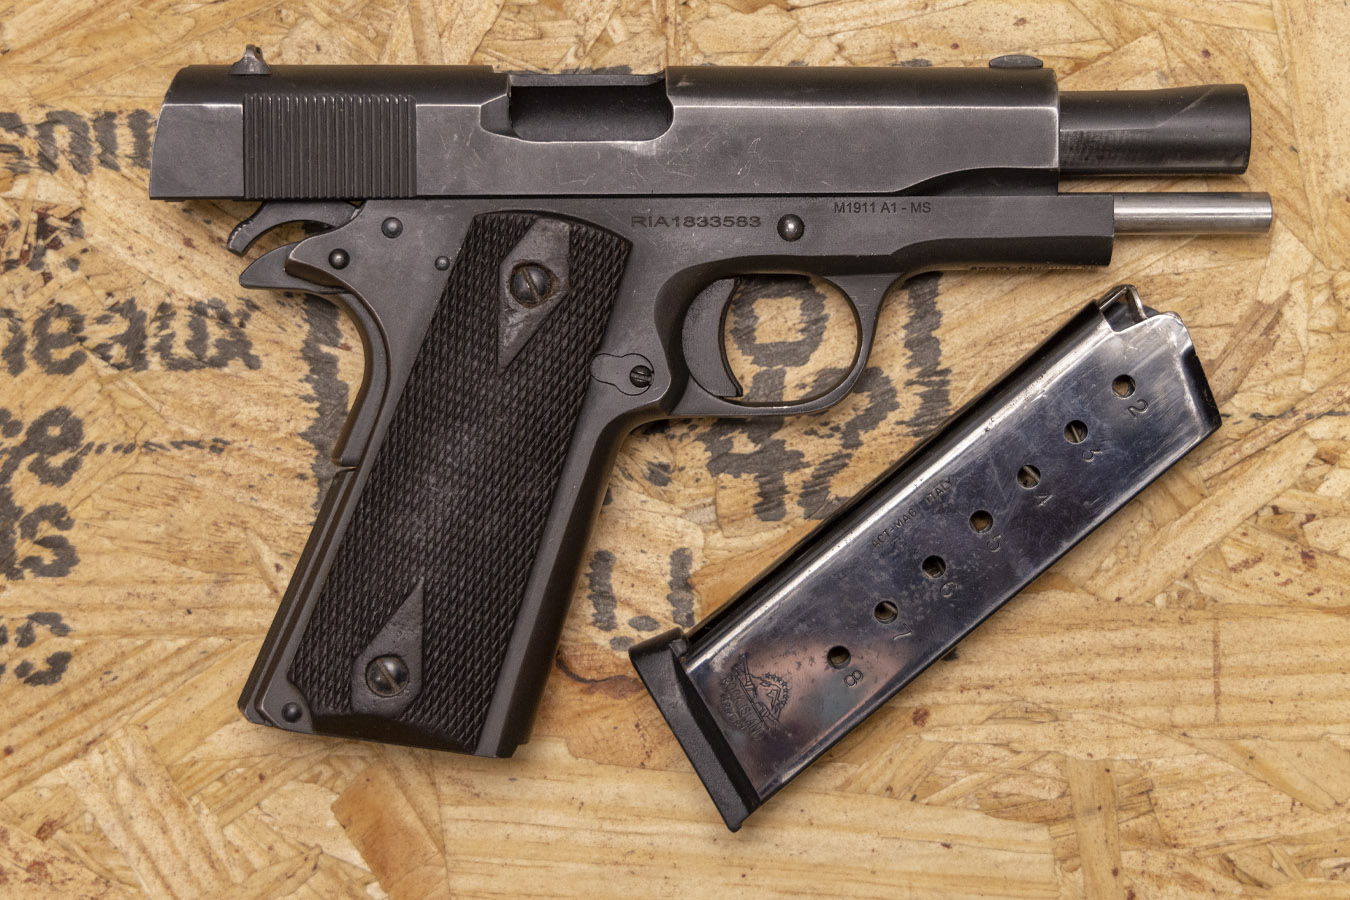 Rock Island Armory M1911 A1 Ms 45 Acp Police Trade In Pistol Sportsmans Outdoor Superstore 9568